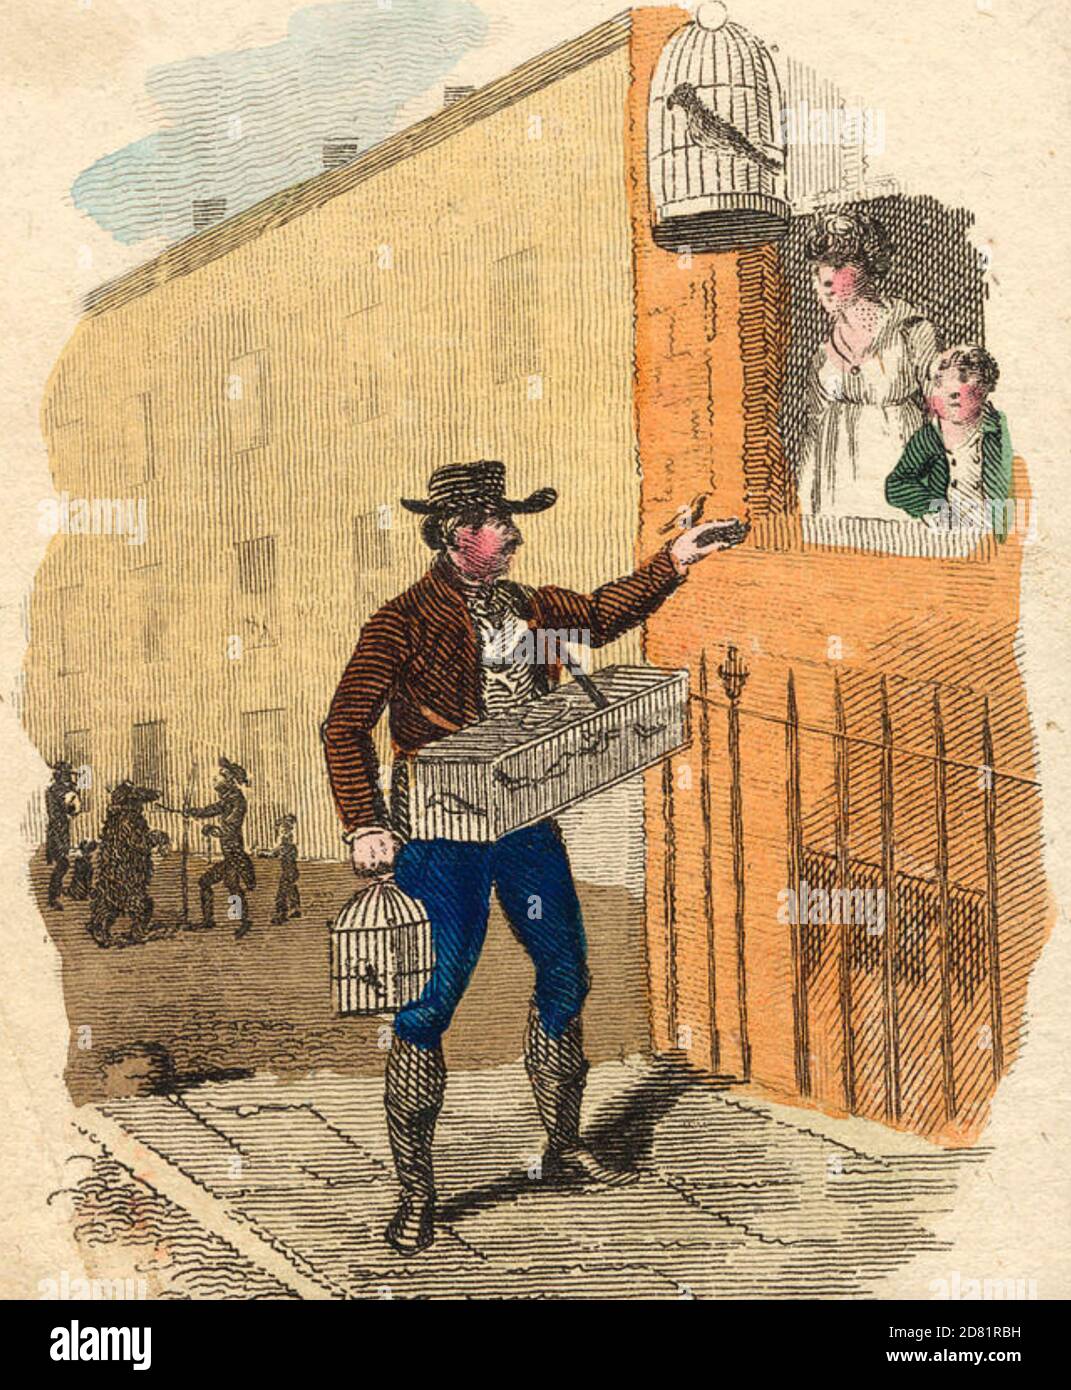 STREET VENDORS: Man selling songbirds about 1810. Note the 'dancing bear' in the background. From 'The Itinerant Traders of London' by William CraIg (1804) Stock Photo